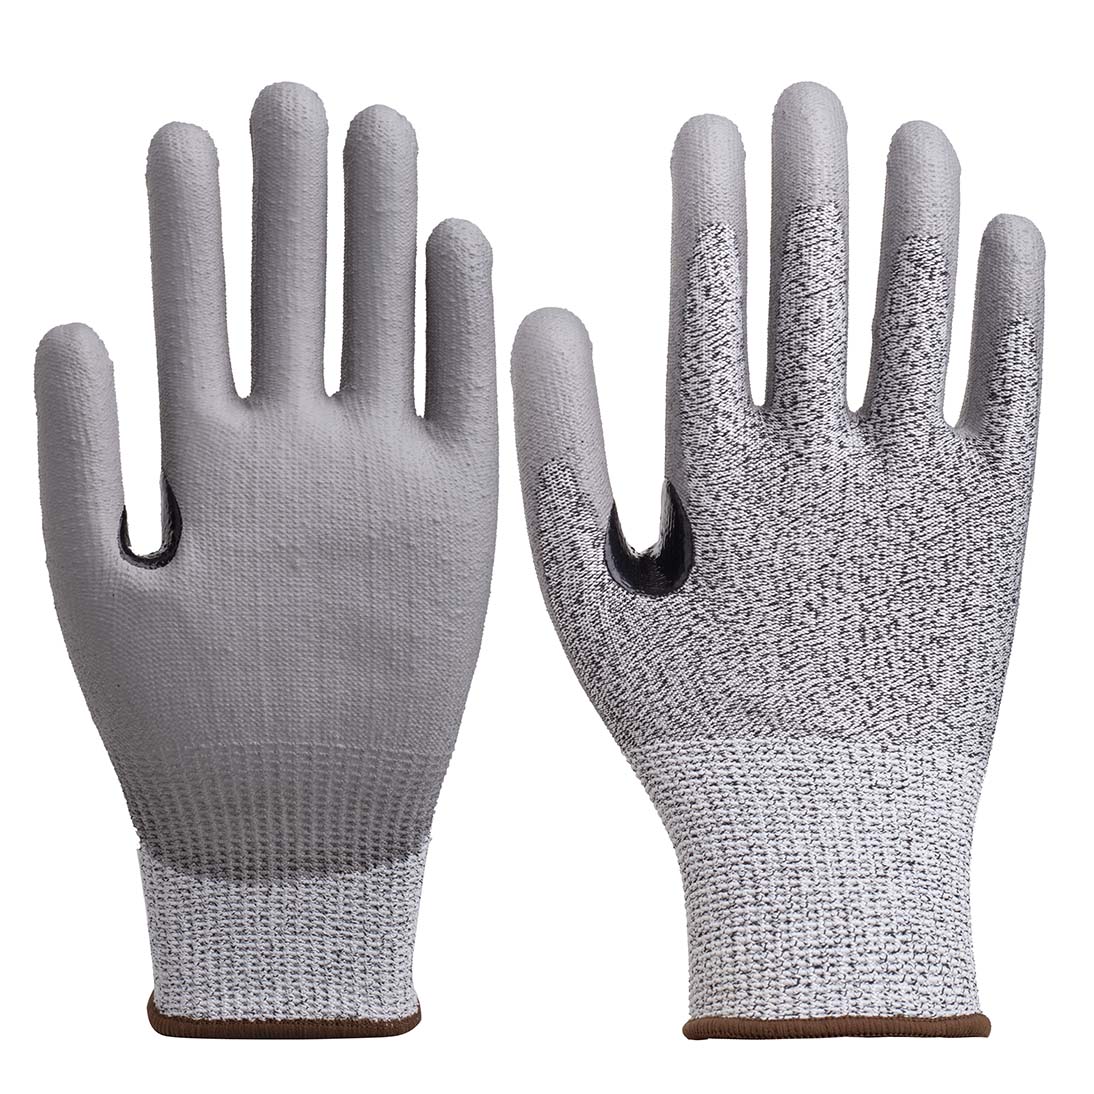 Cut resistant A4 glove PU palm coated, nitrile reinforced thumb